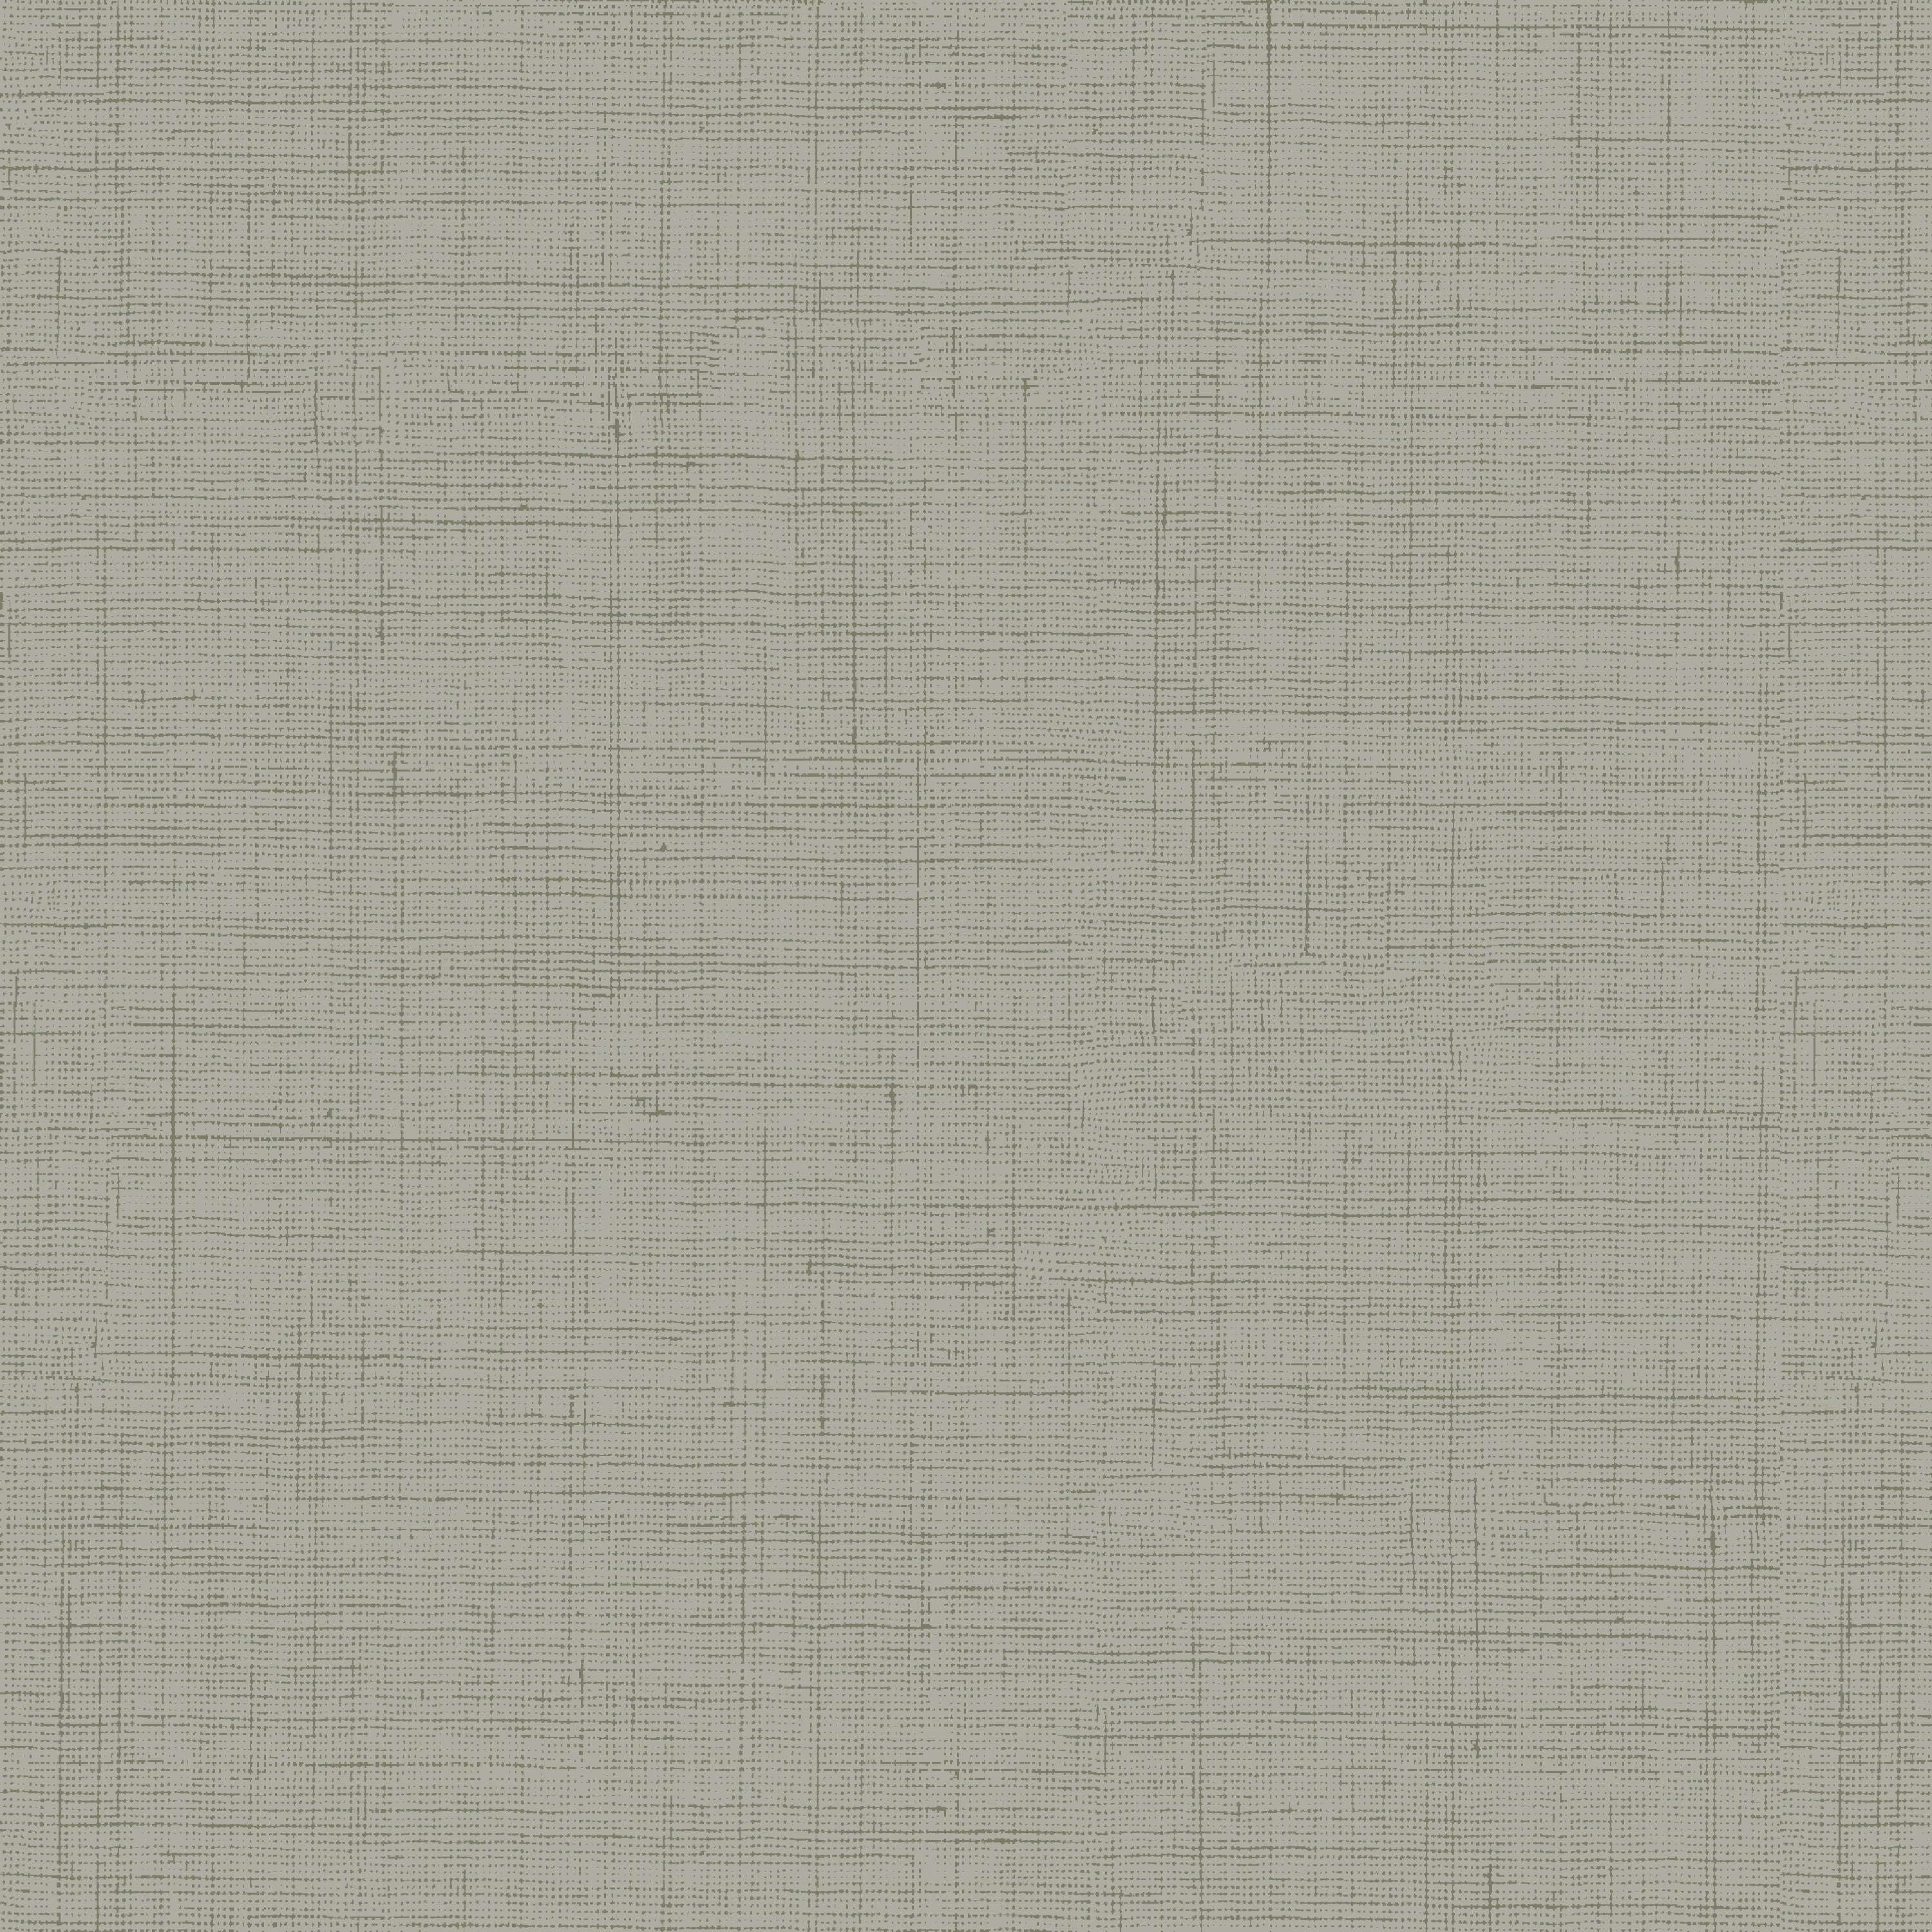 Waverly Inspirations 100% Cotton Duck 54" Texture Light Grey Color Sewing Fabric by the Yard